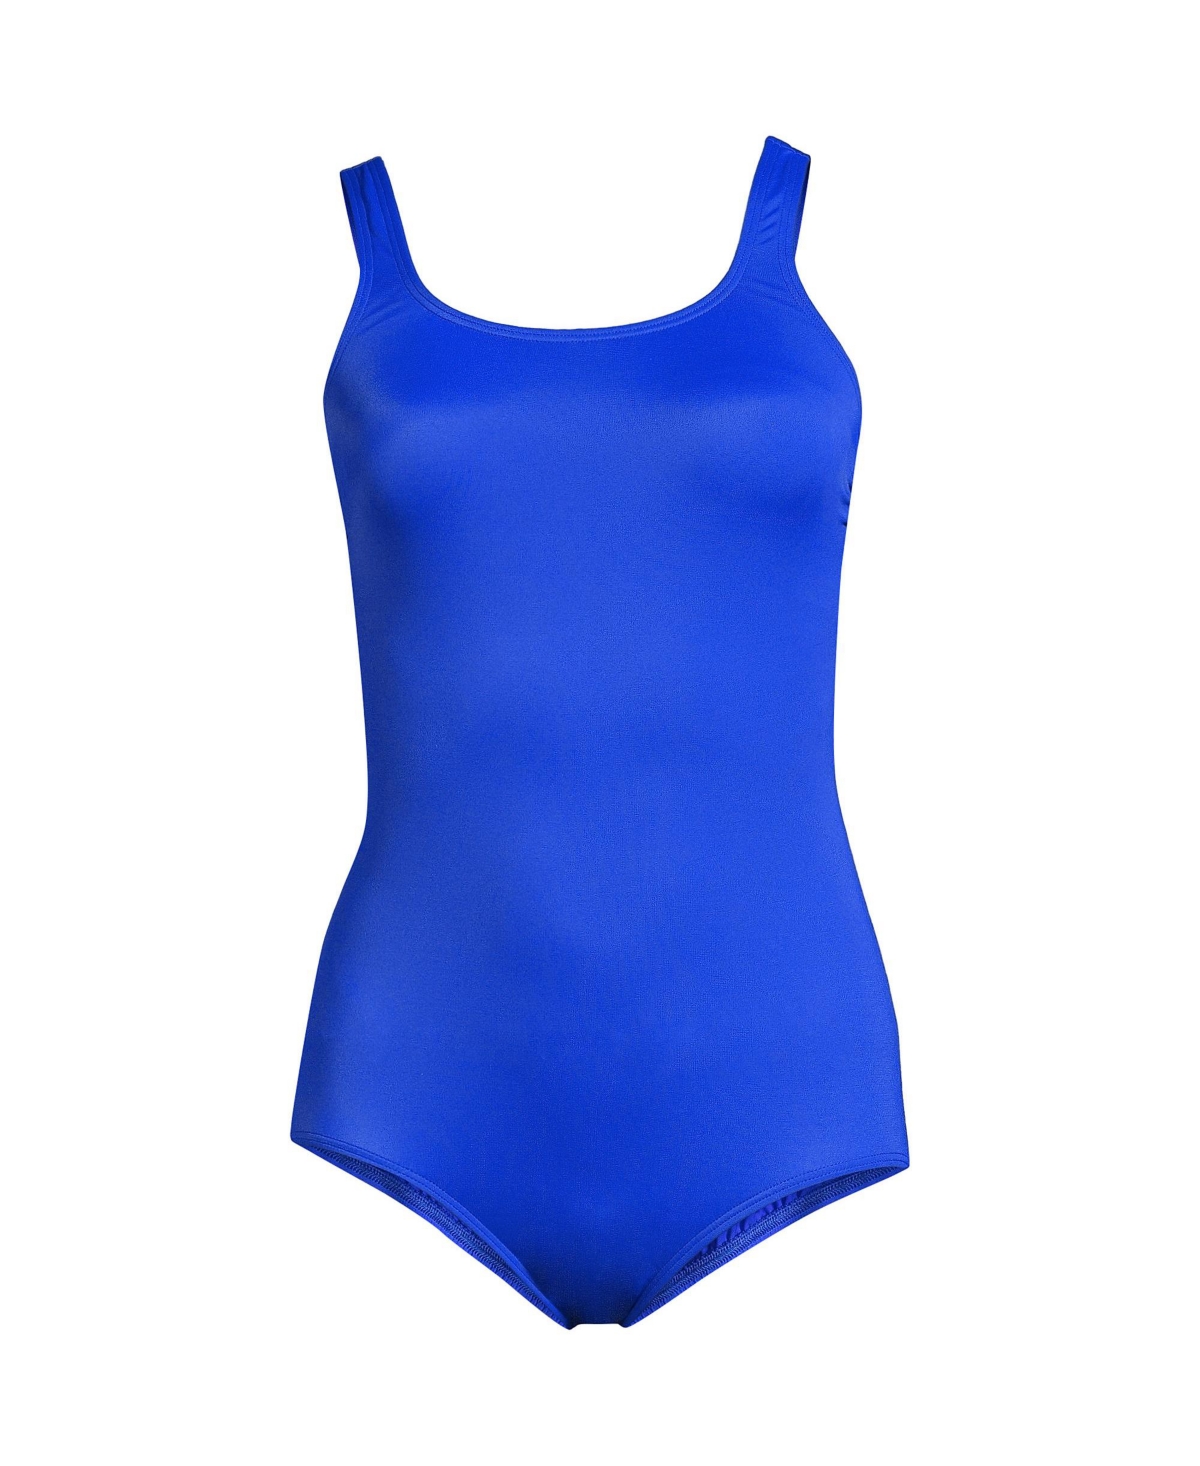 Women's Petite Scoop Neck Soft Cup Tugless Sporty One Piece Swimsuit - Electric blue